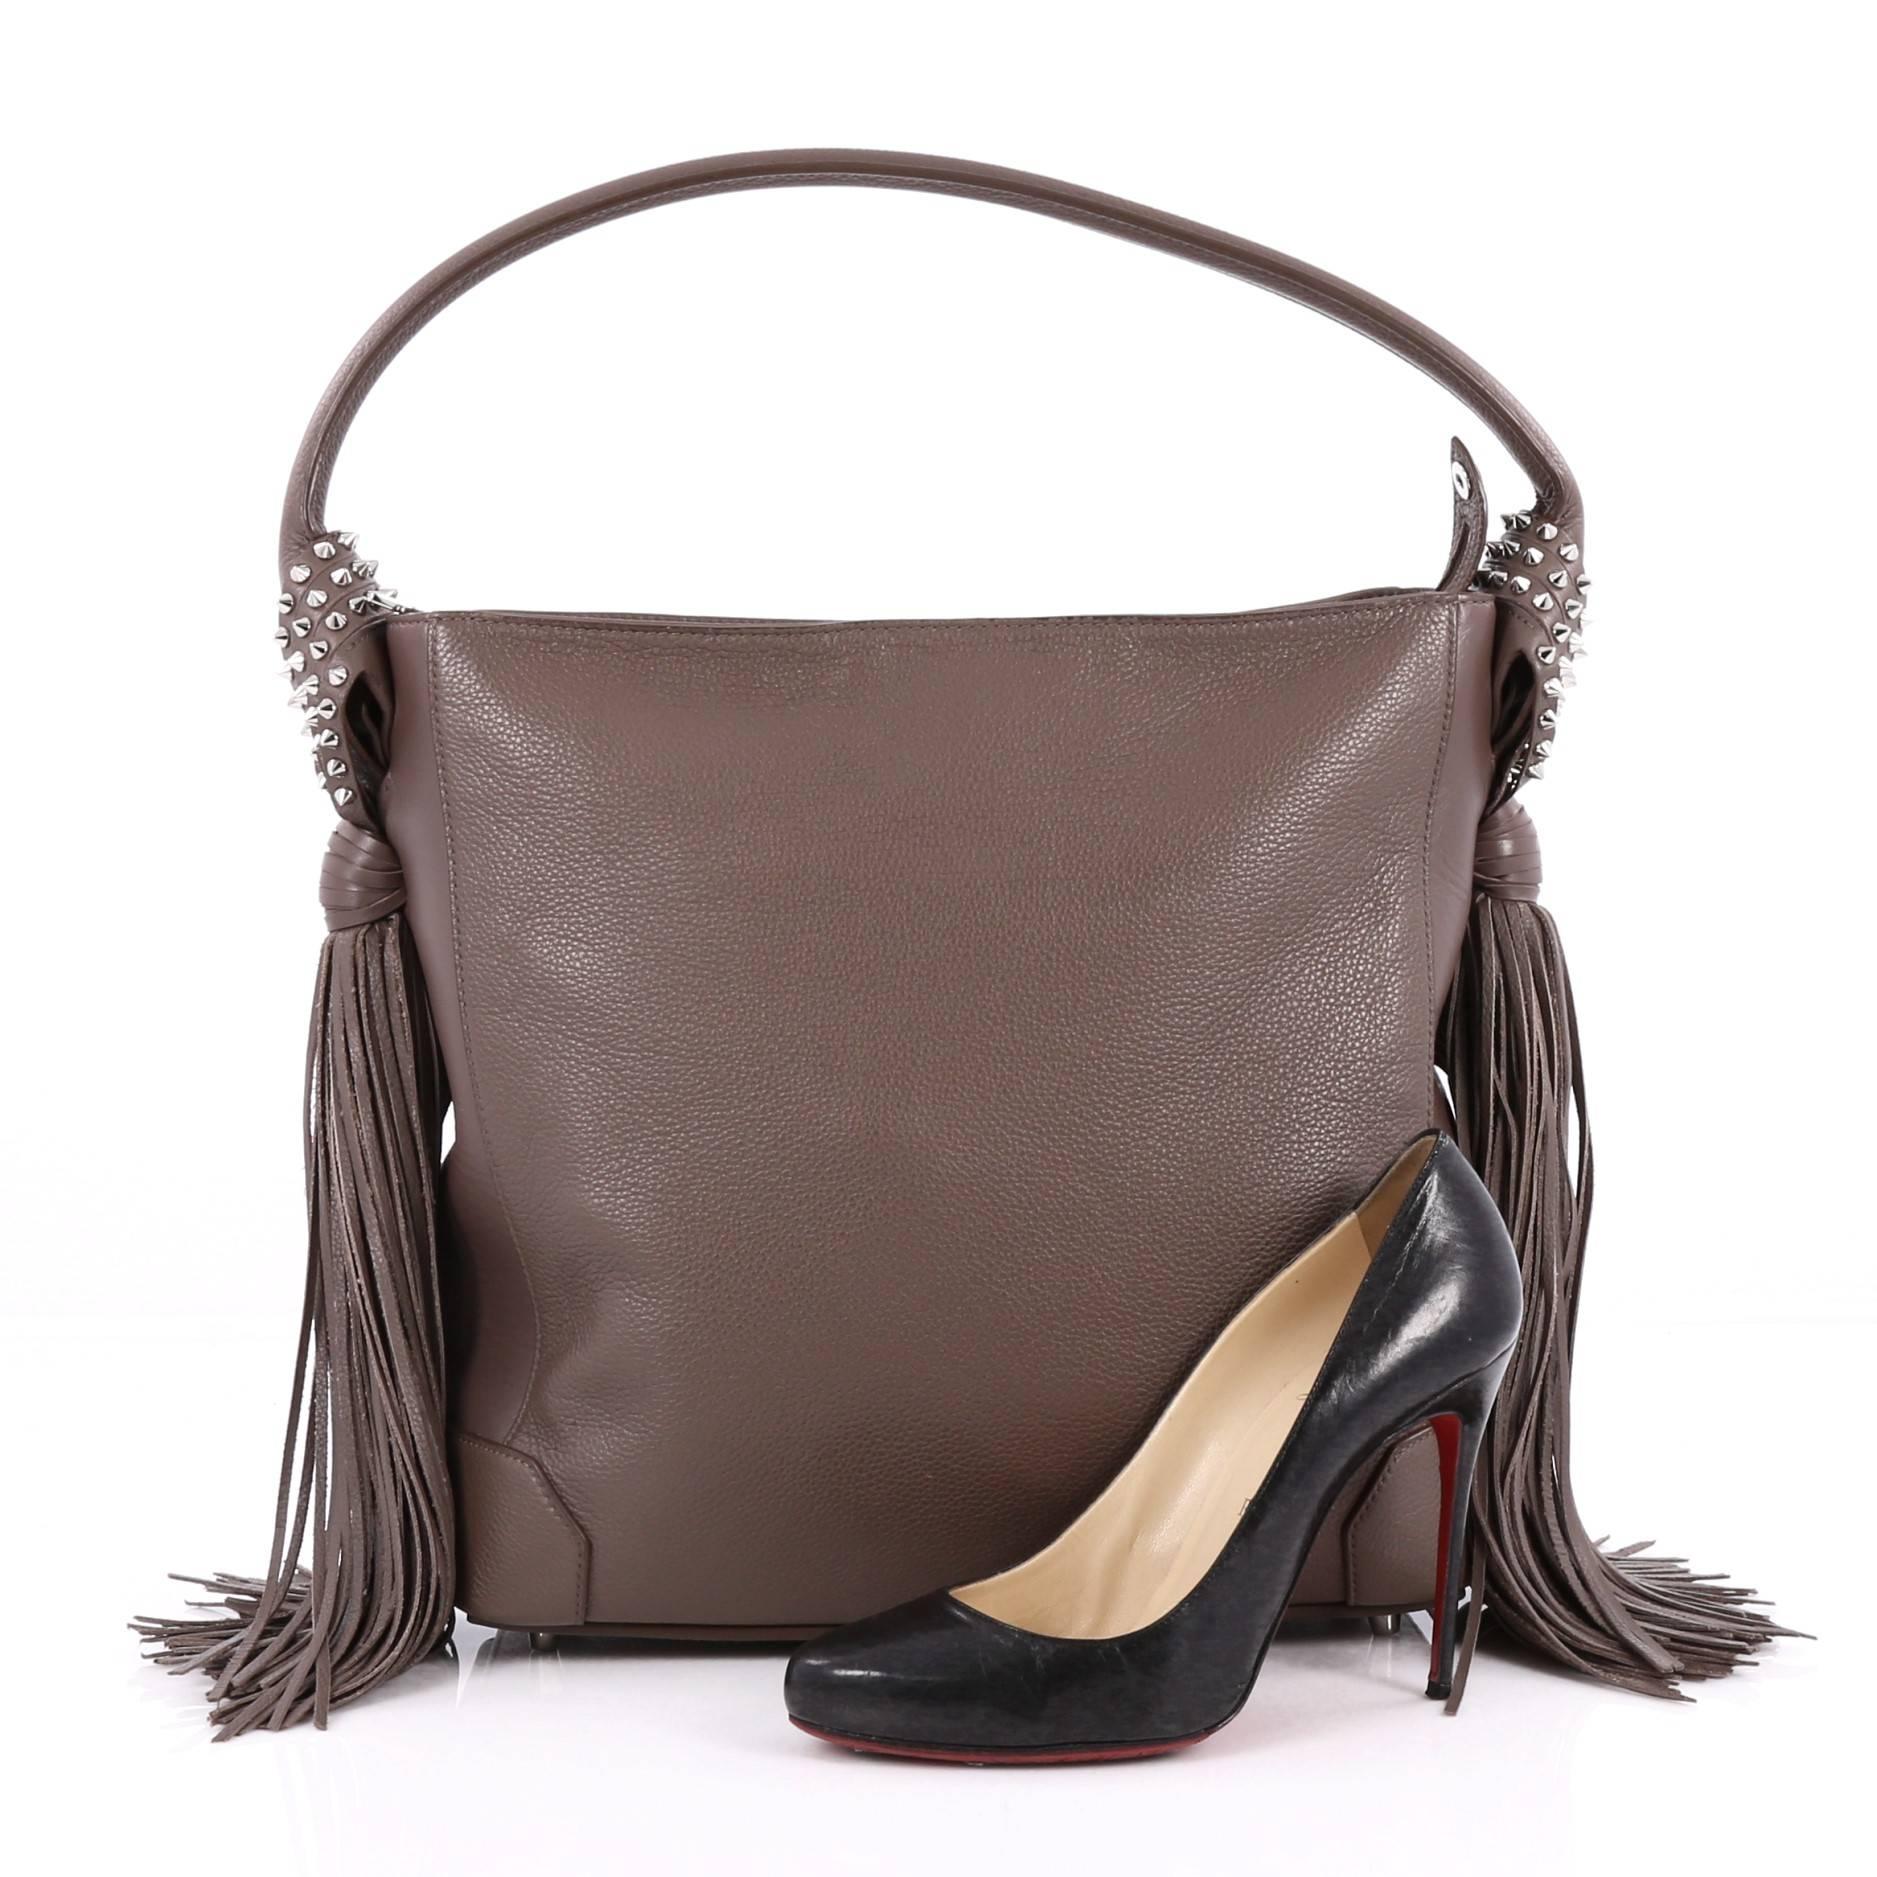 This authentic Christian Louboutin Eloise Fringe Hobo Leather Medium is a supple slouchy bag that takes on a bohemian styling. Crafted from brown leather, this gorgeous bag features flat leather shoulder strap, swinging fringe and spiked sides, two